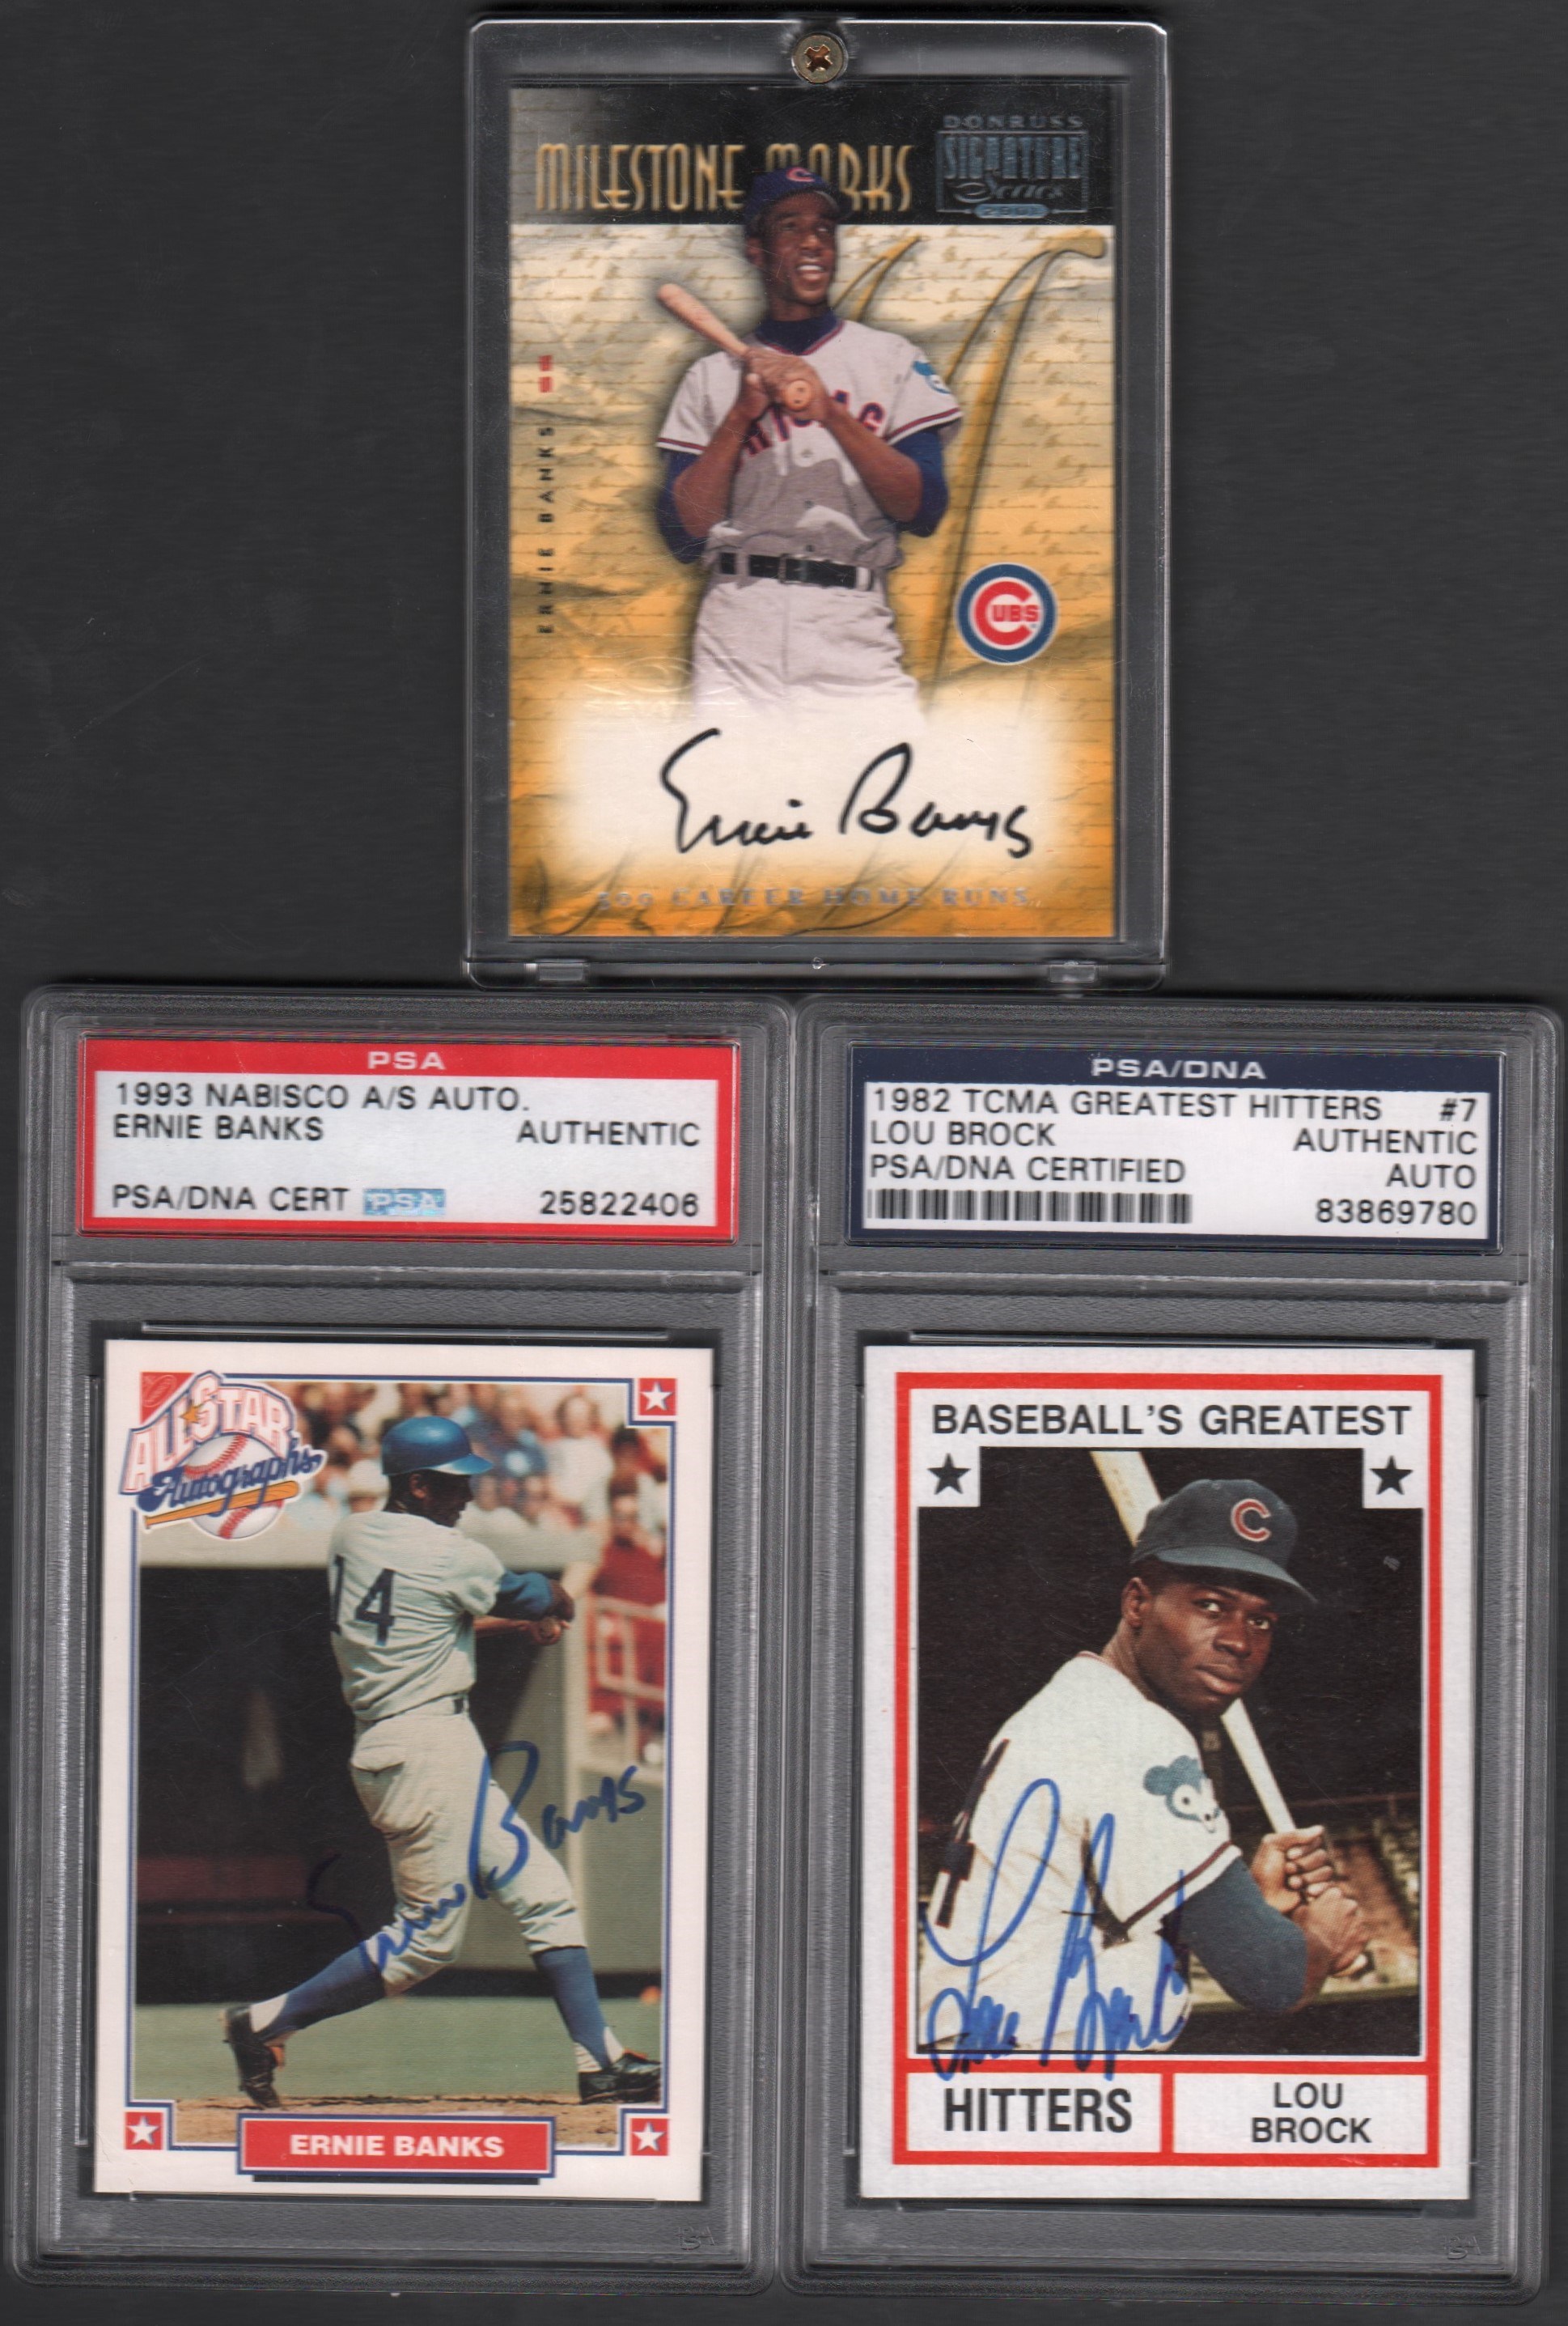 - 1970s Signed Baseball Card Collection with Ernie Banks